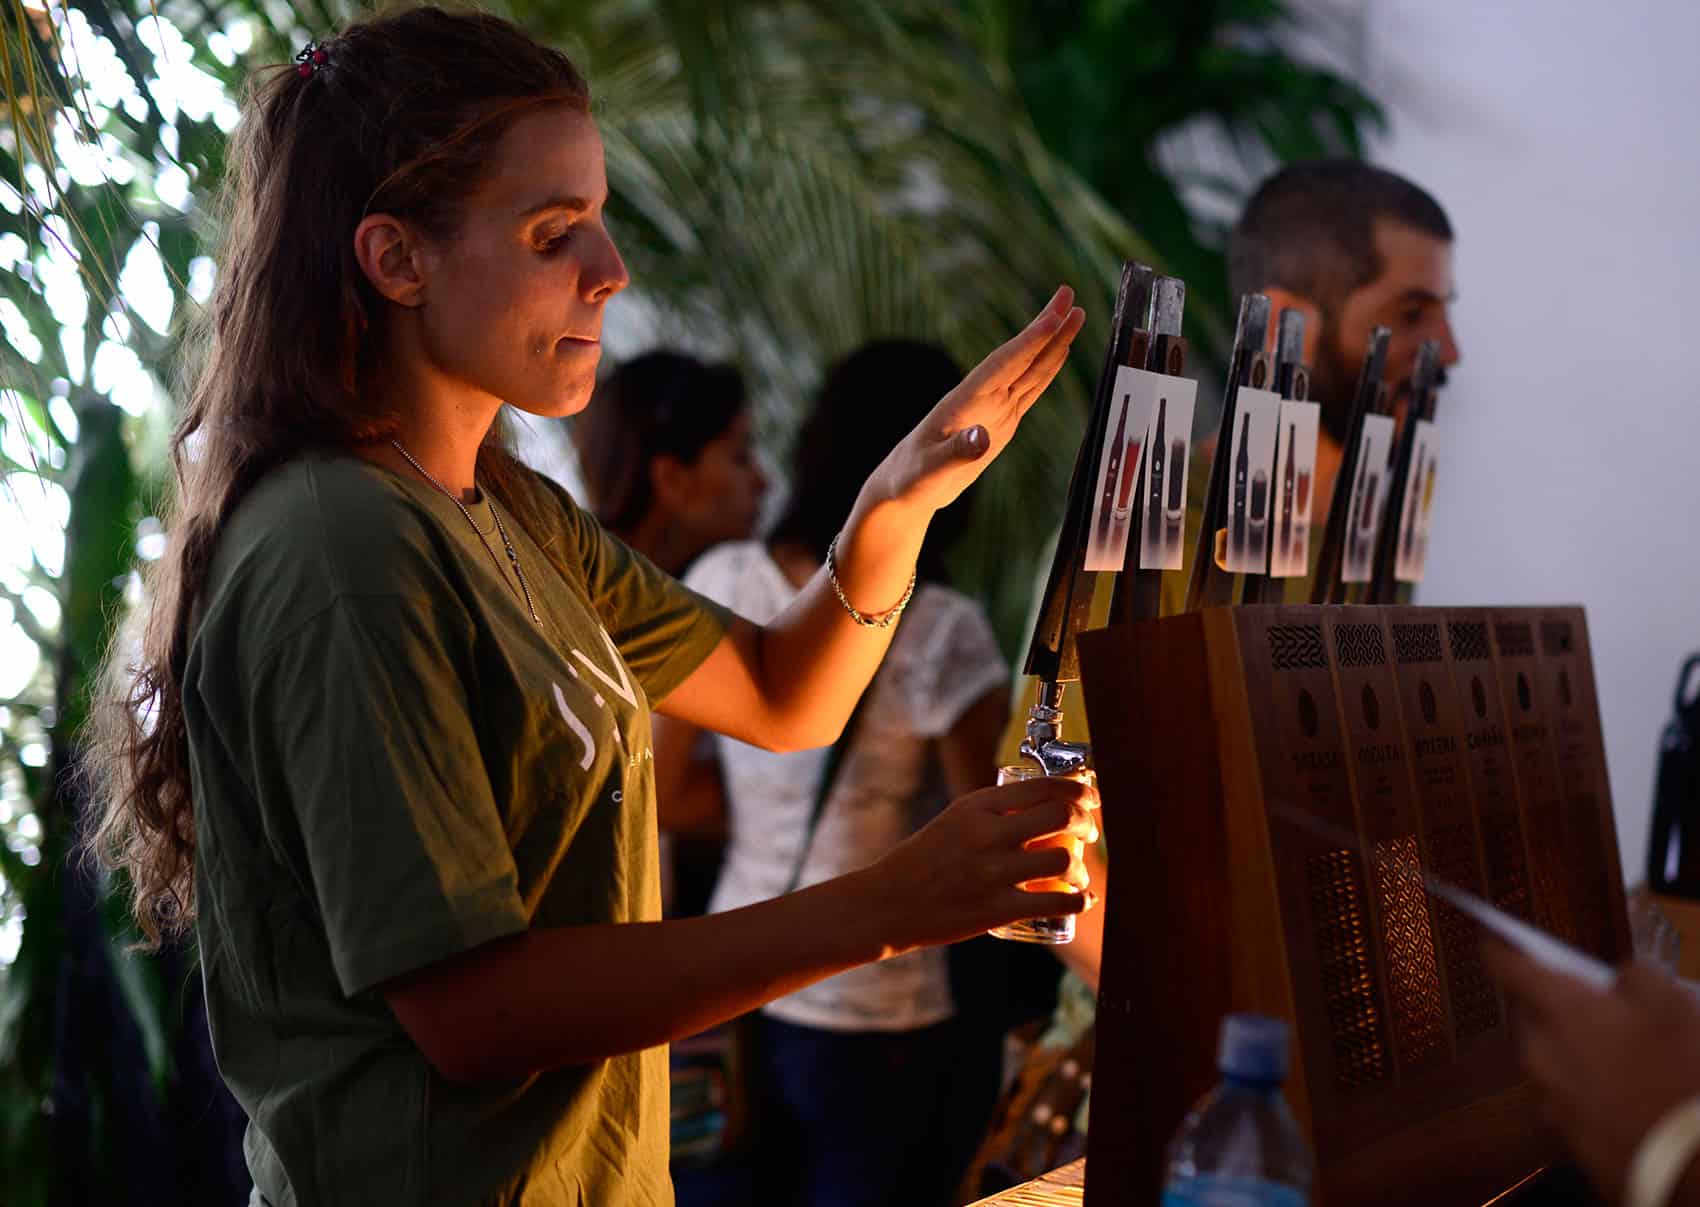 Costa Rica Craft Beer Festival: A bartender pours beer at Selva brewing company